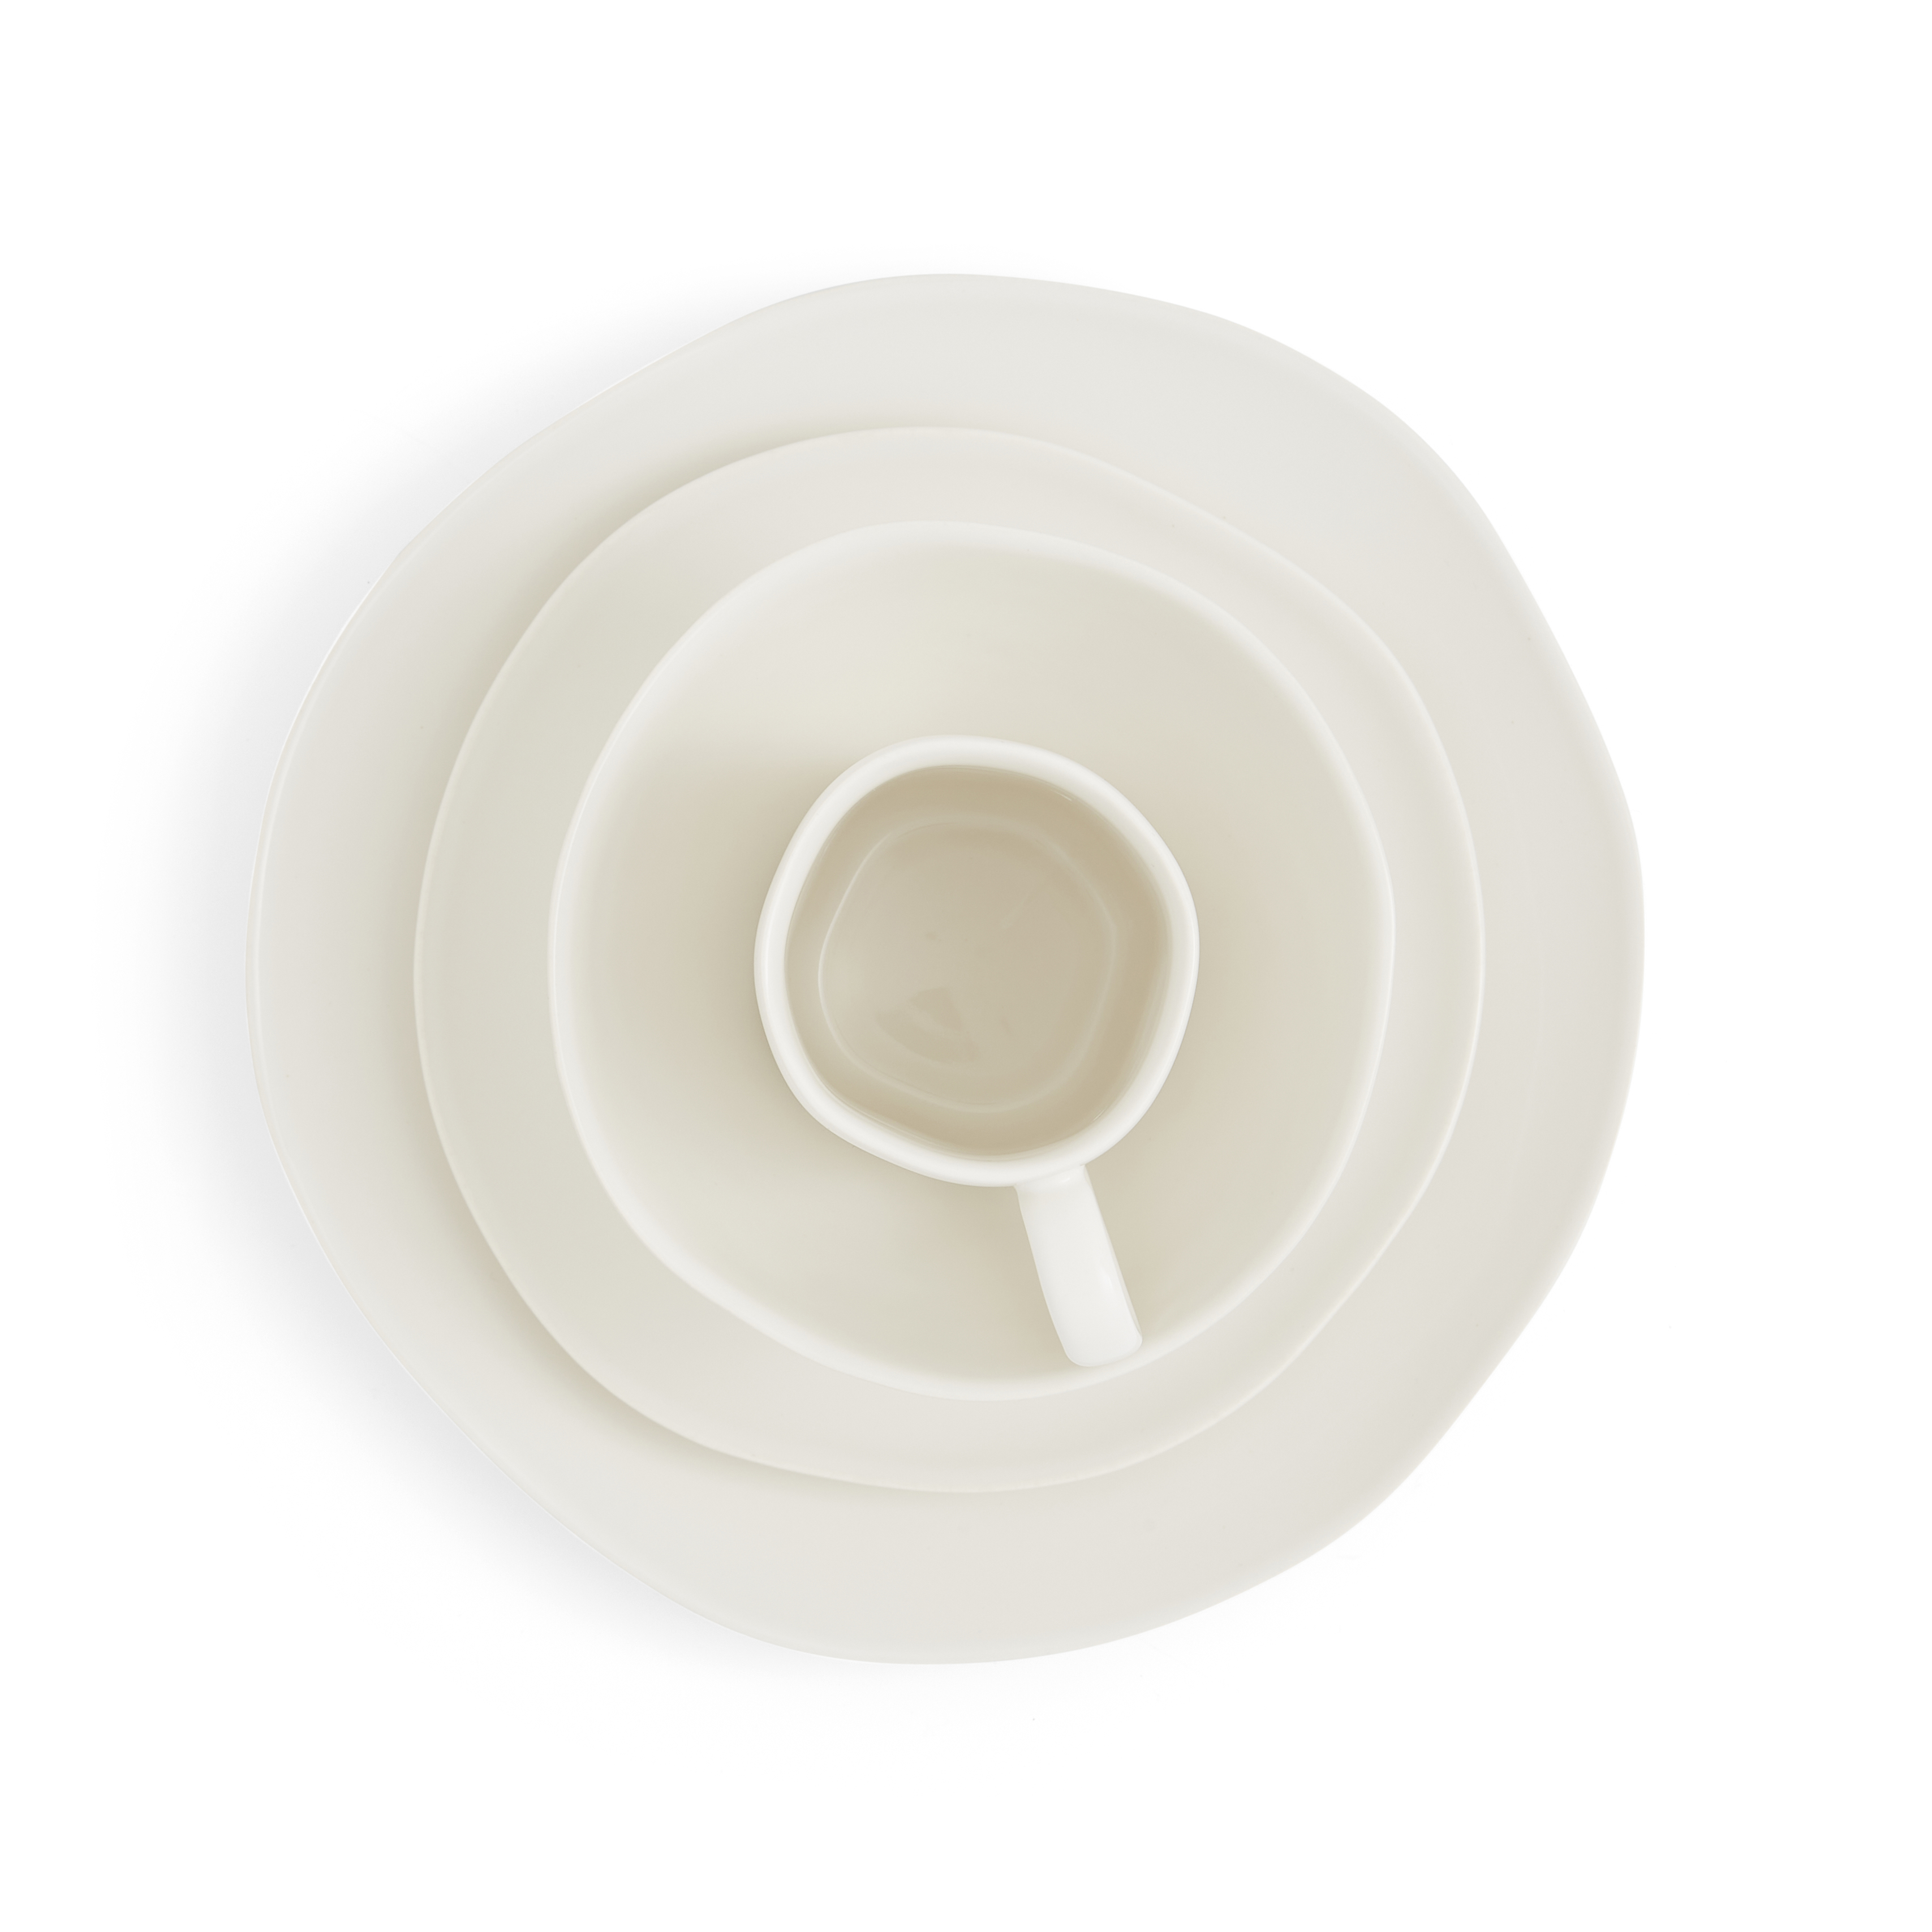 Sophie Conran Arbor 4 Piece Place Setting- Creamy White image number null